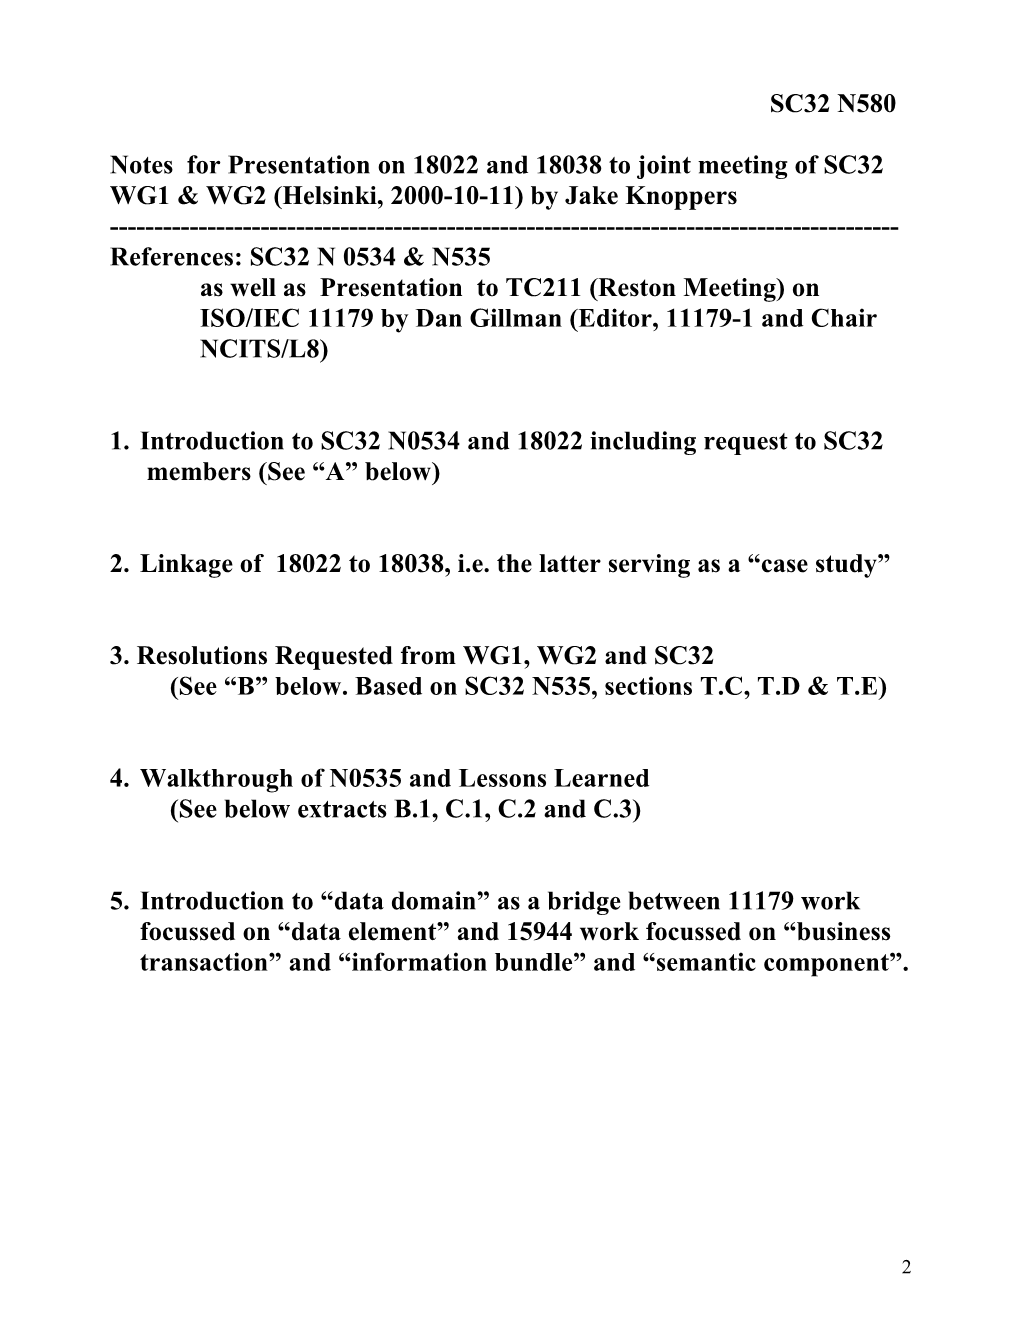 Notes for Presentation on 18022 and 18038 to Joint Meeting of SC32 WG1 & WG2 (Helsinki